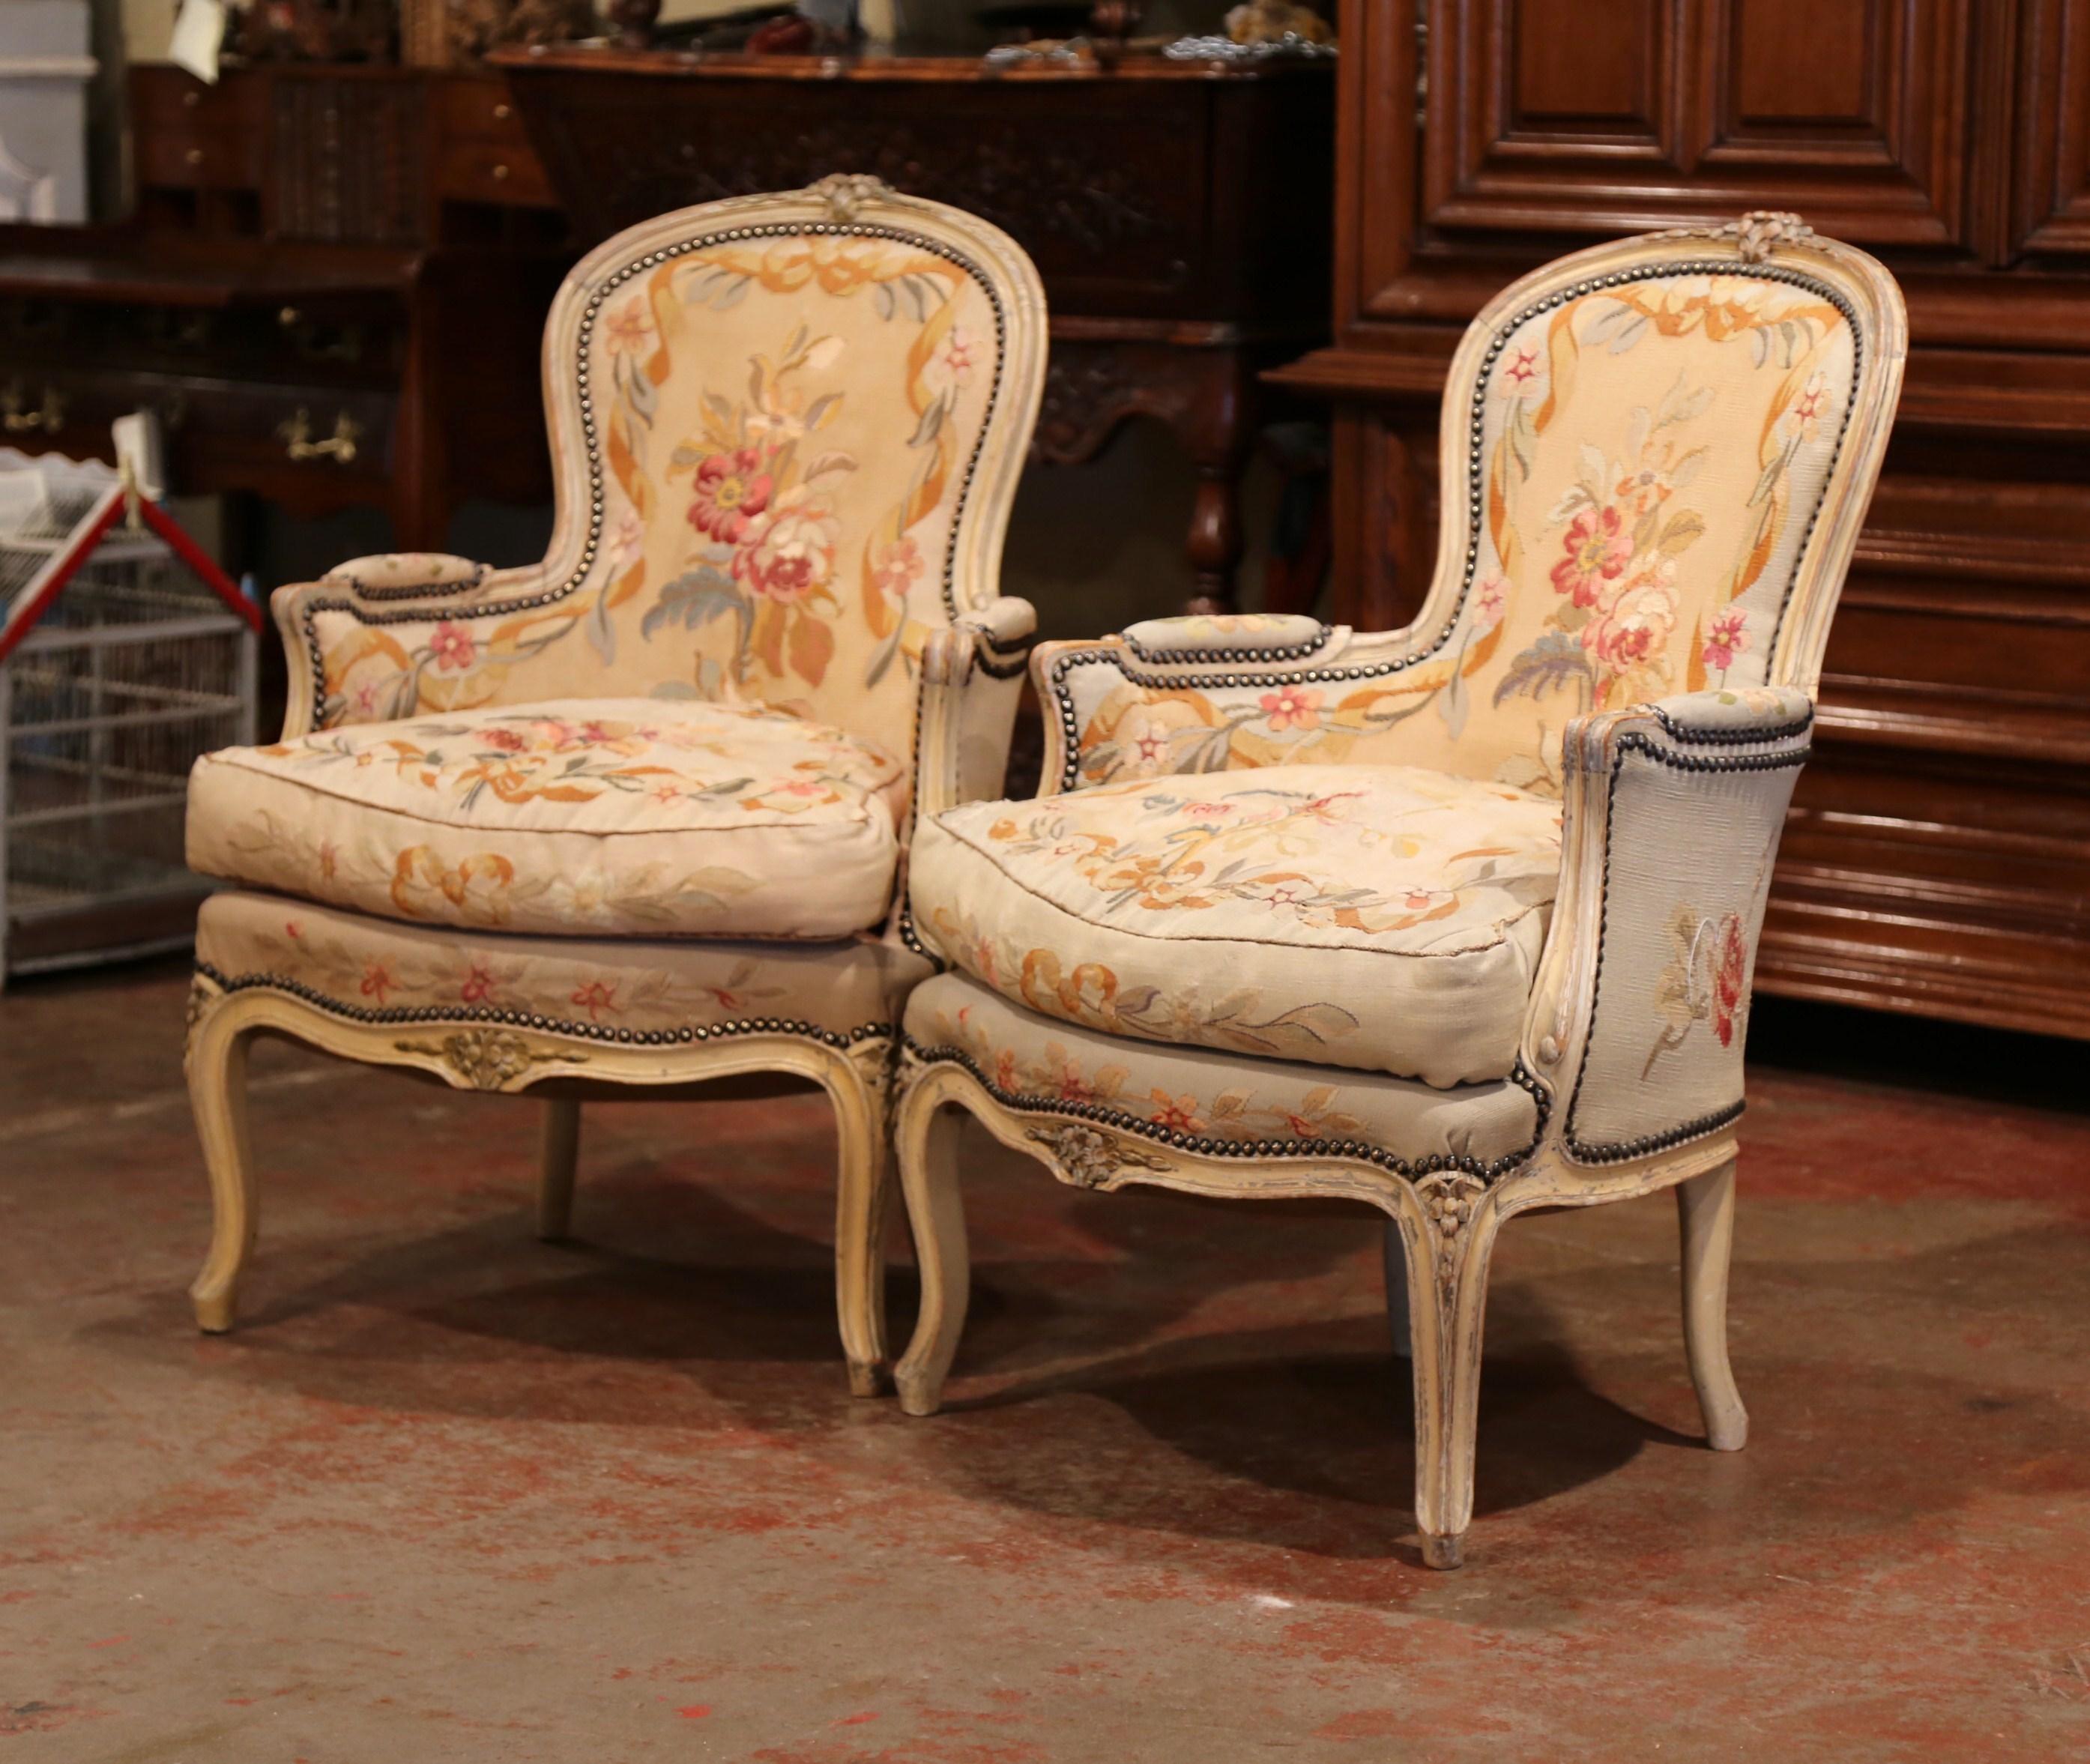 These elegant antique fruitwood bergeres were crafted in France, circa 1860. Both Louis XV style Baroque armchairs have a curved, pitched back. The chairs are decorated on the pediment, curved legs and armrests with hand carved floral